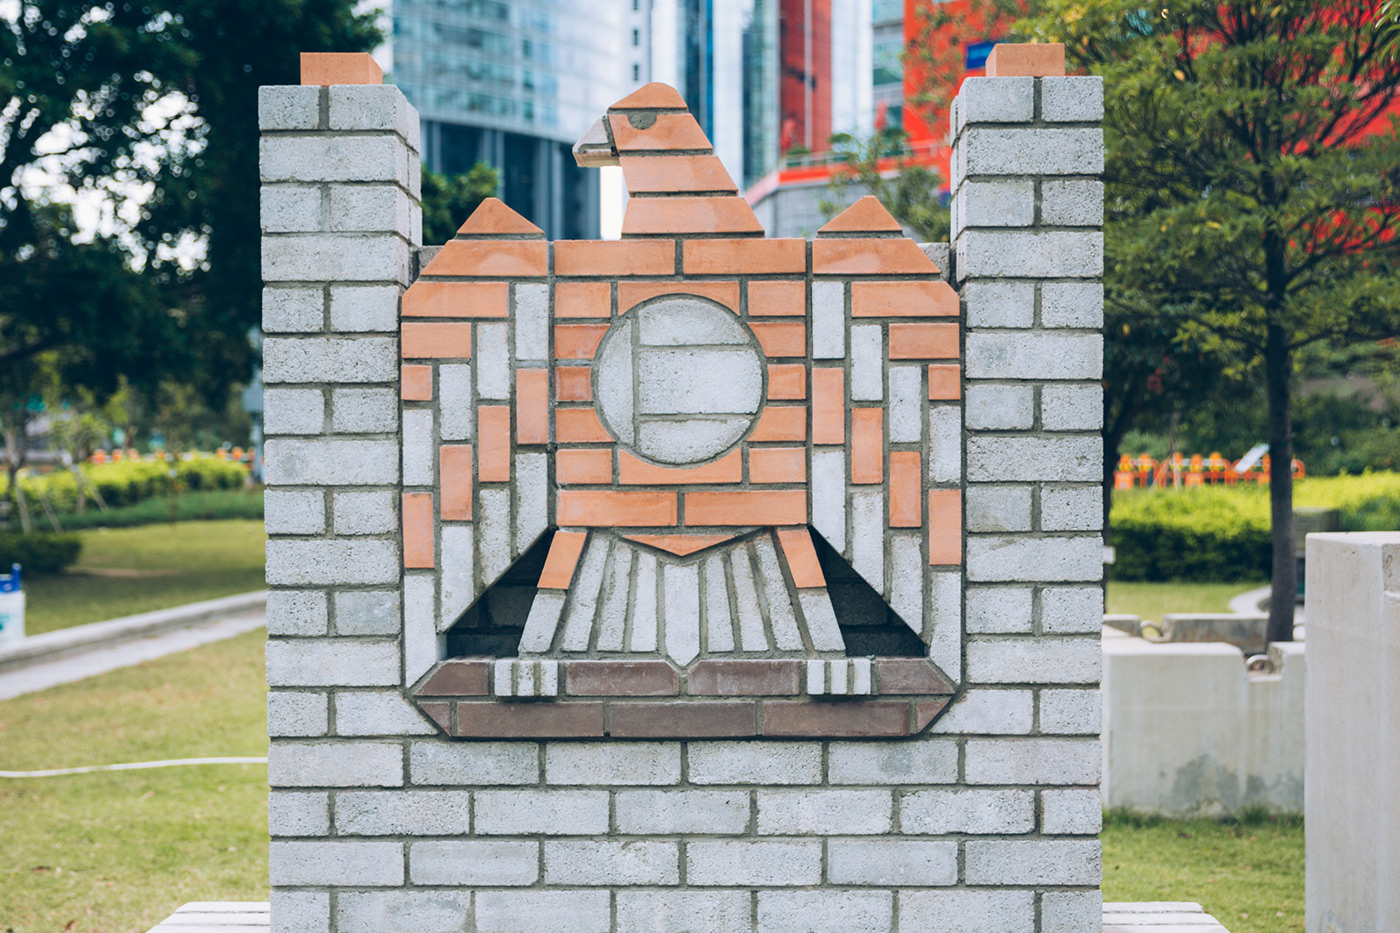 【Falcons】Wall tiling and bricklaying can take innumerable forms. The two “Falcons” in these art pieces masterfully marry creativity and craftsmanship, transforming tiny bricks into a beautiful mural-like brick wall. by: TO Fai (Instructor), CHAN Wing-kit (Student), KOO Chun-kin (Student), YAU Ho-him (Trainee) HKIC – Sheung Shui Campus (Bricklaying, Plastering & Tiling)